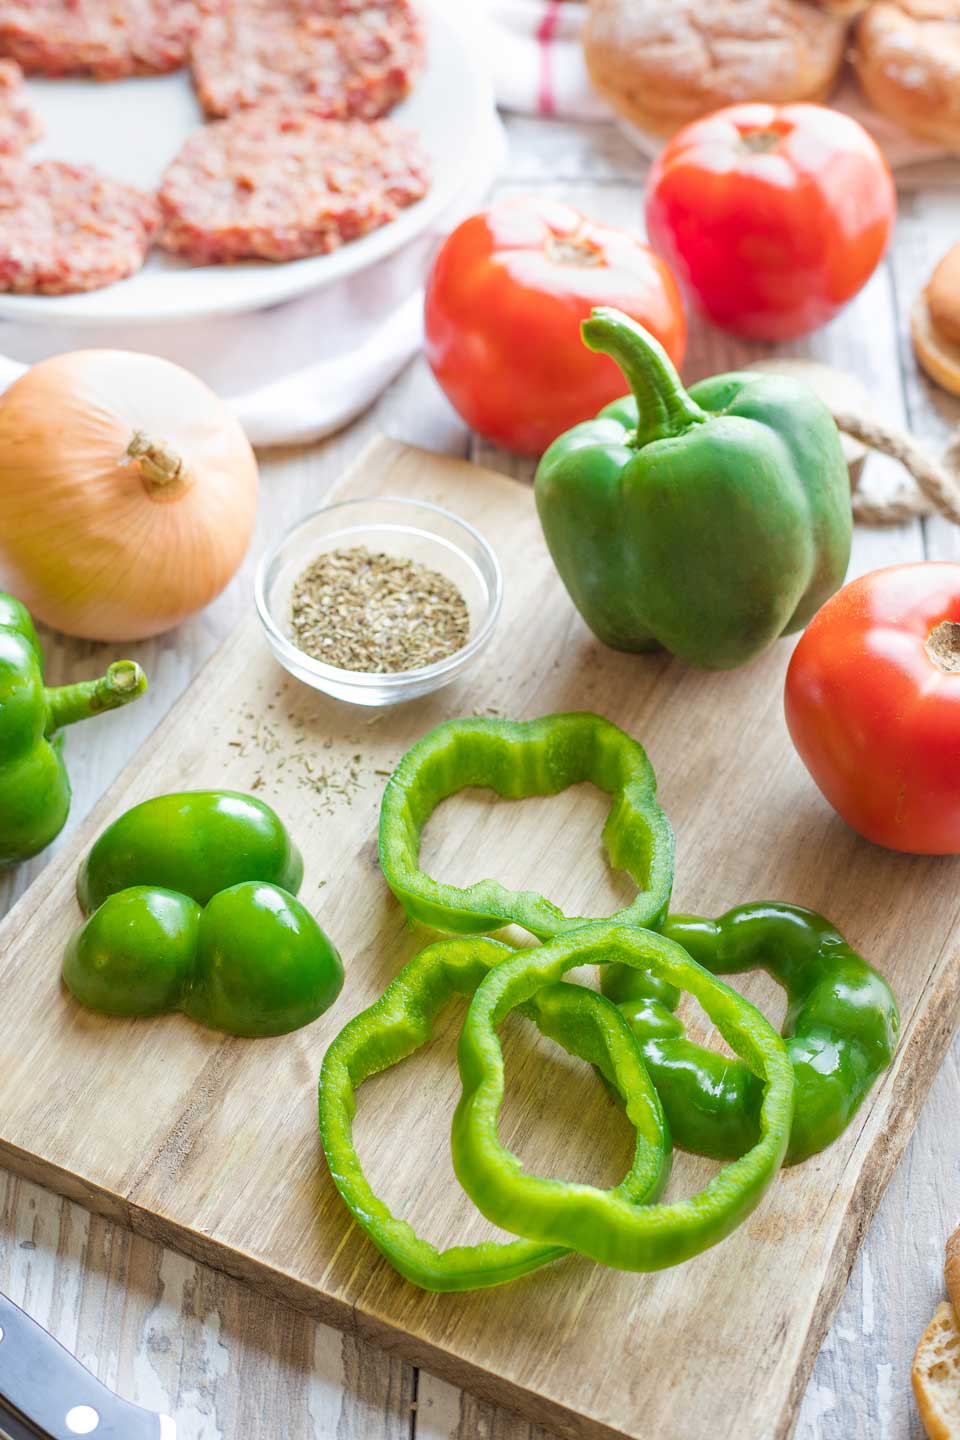 Ingredients: green pepper rings on cutting board, surrounded by tomatoes and Italian spices with buns and raw burgers in background.